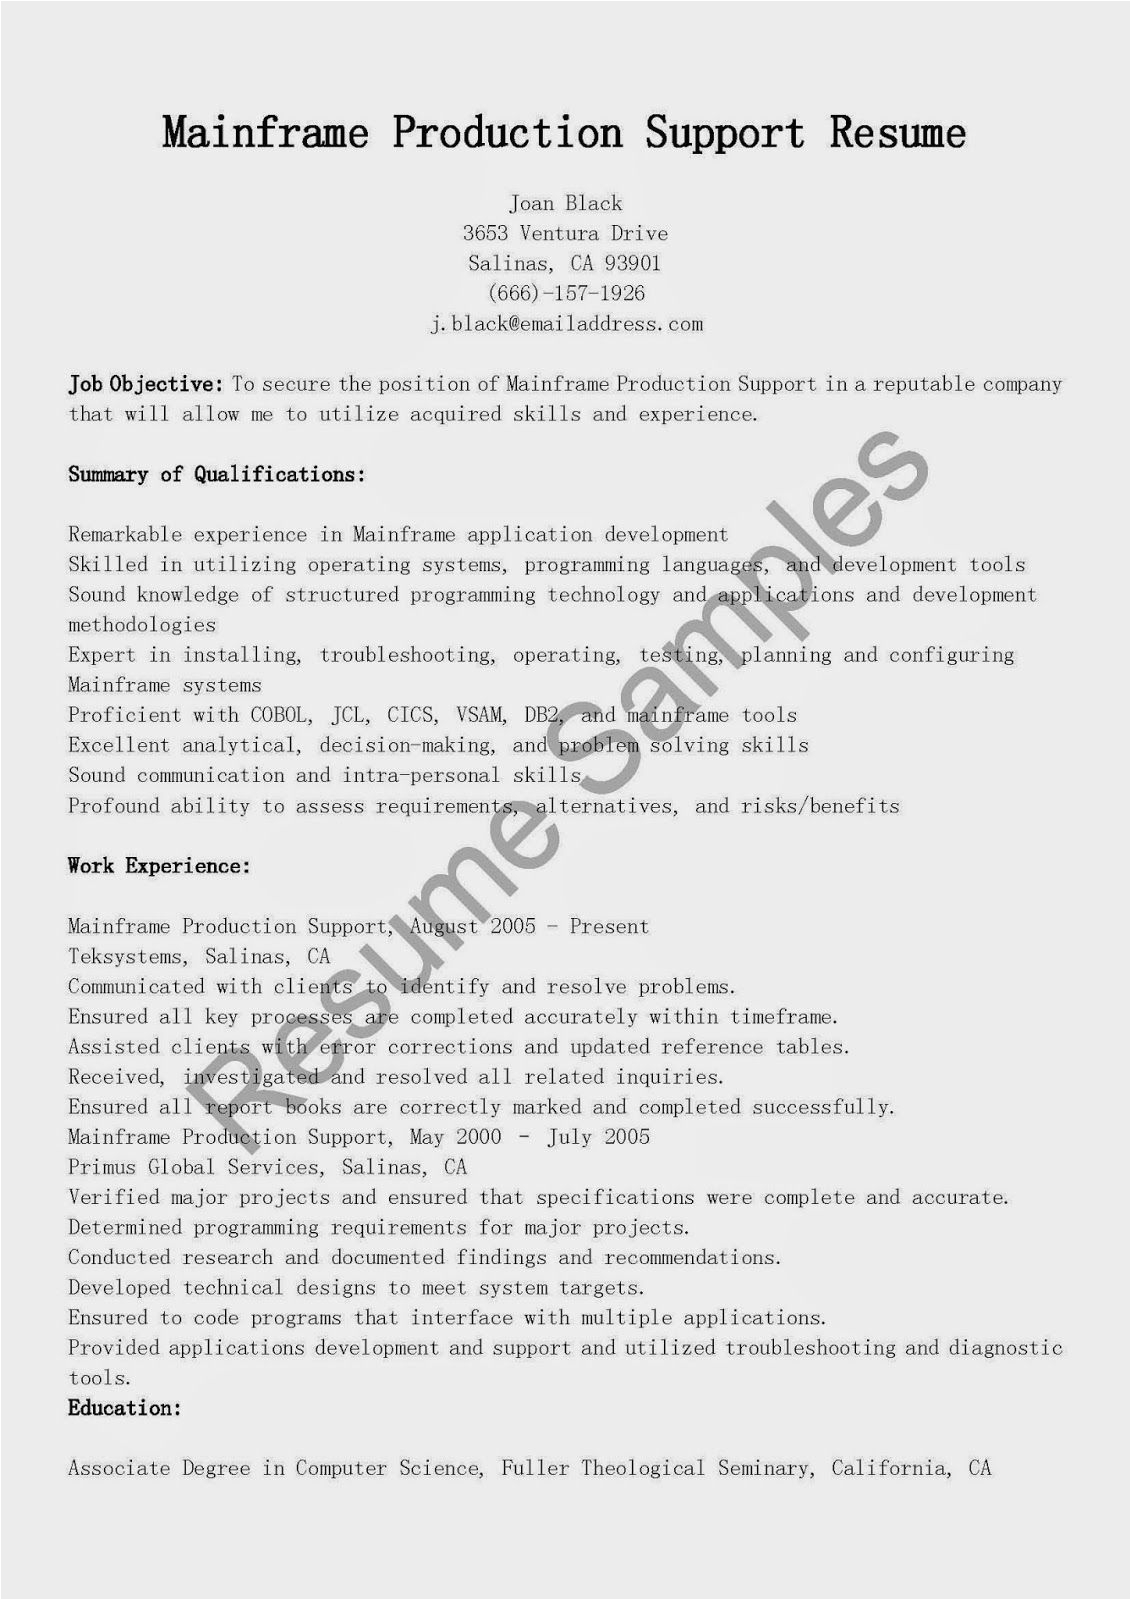 Sample Resume for Mainframe Production Support Mainframe Production Support Resume Sample